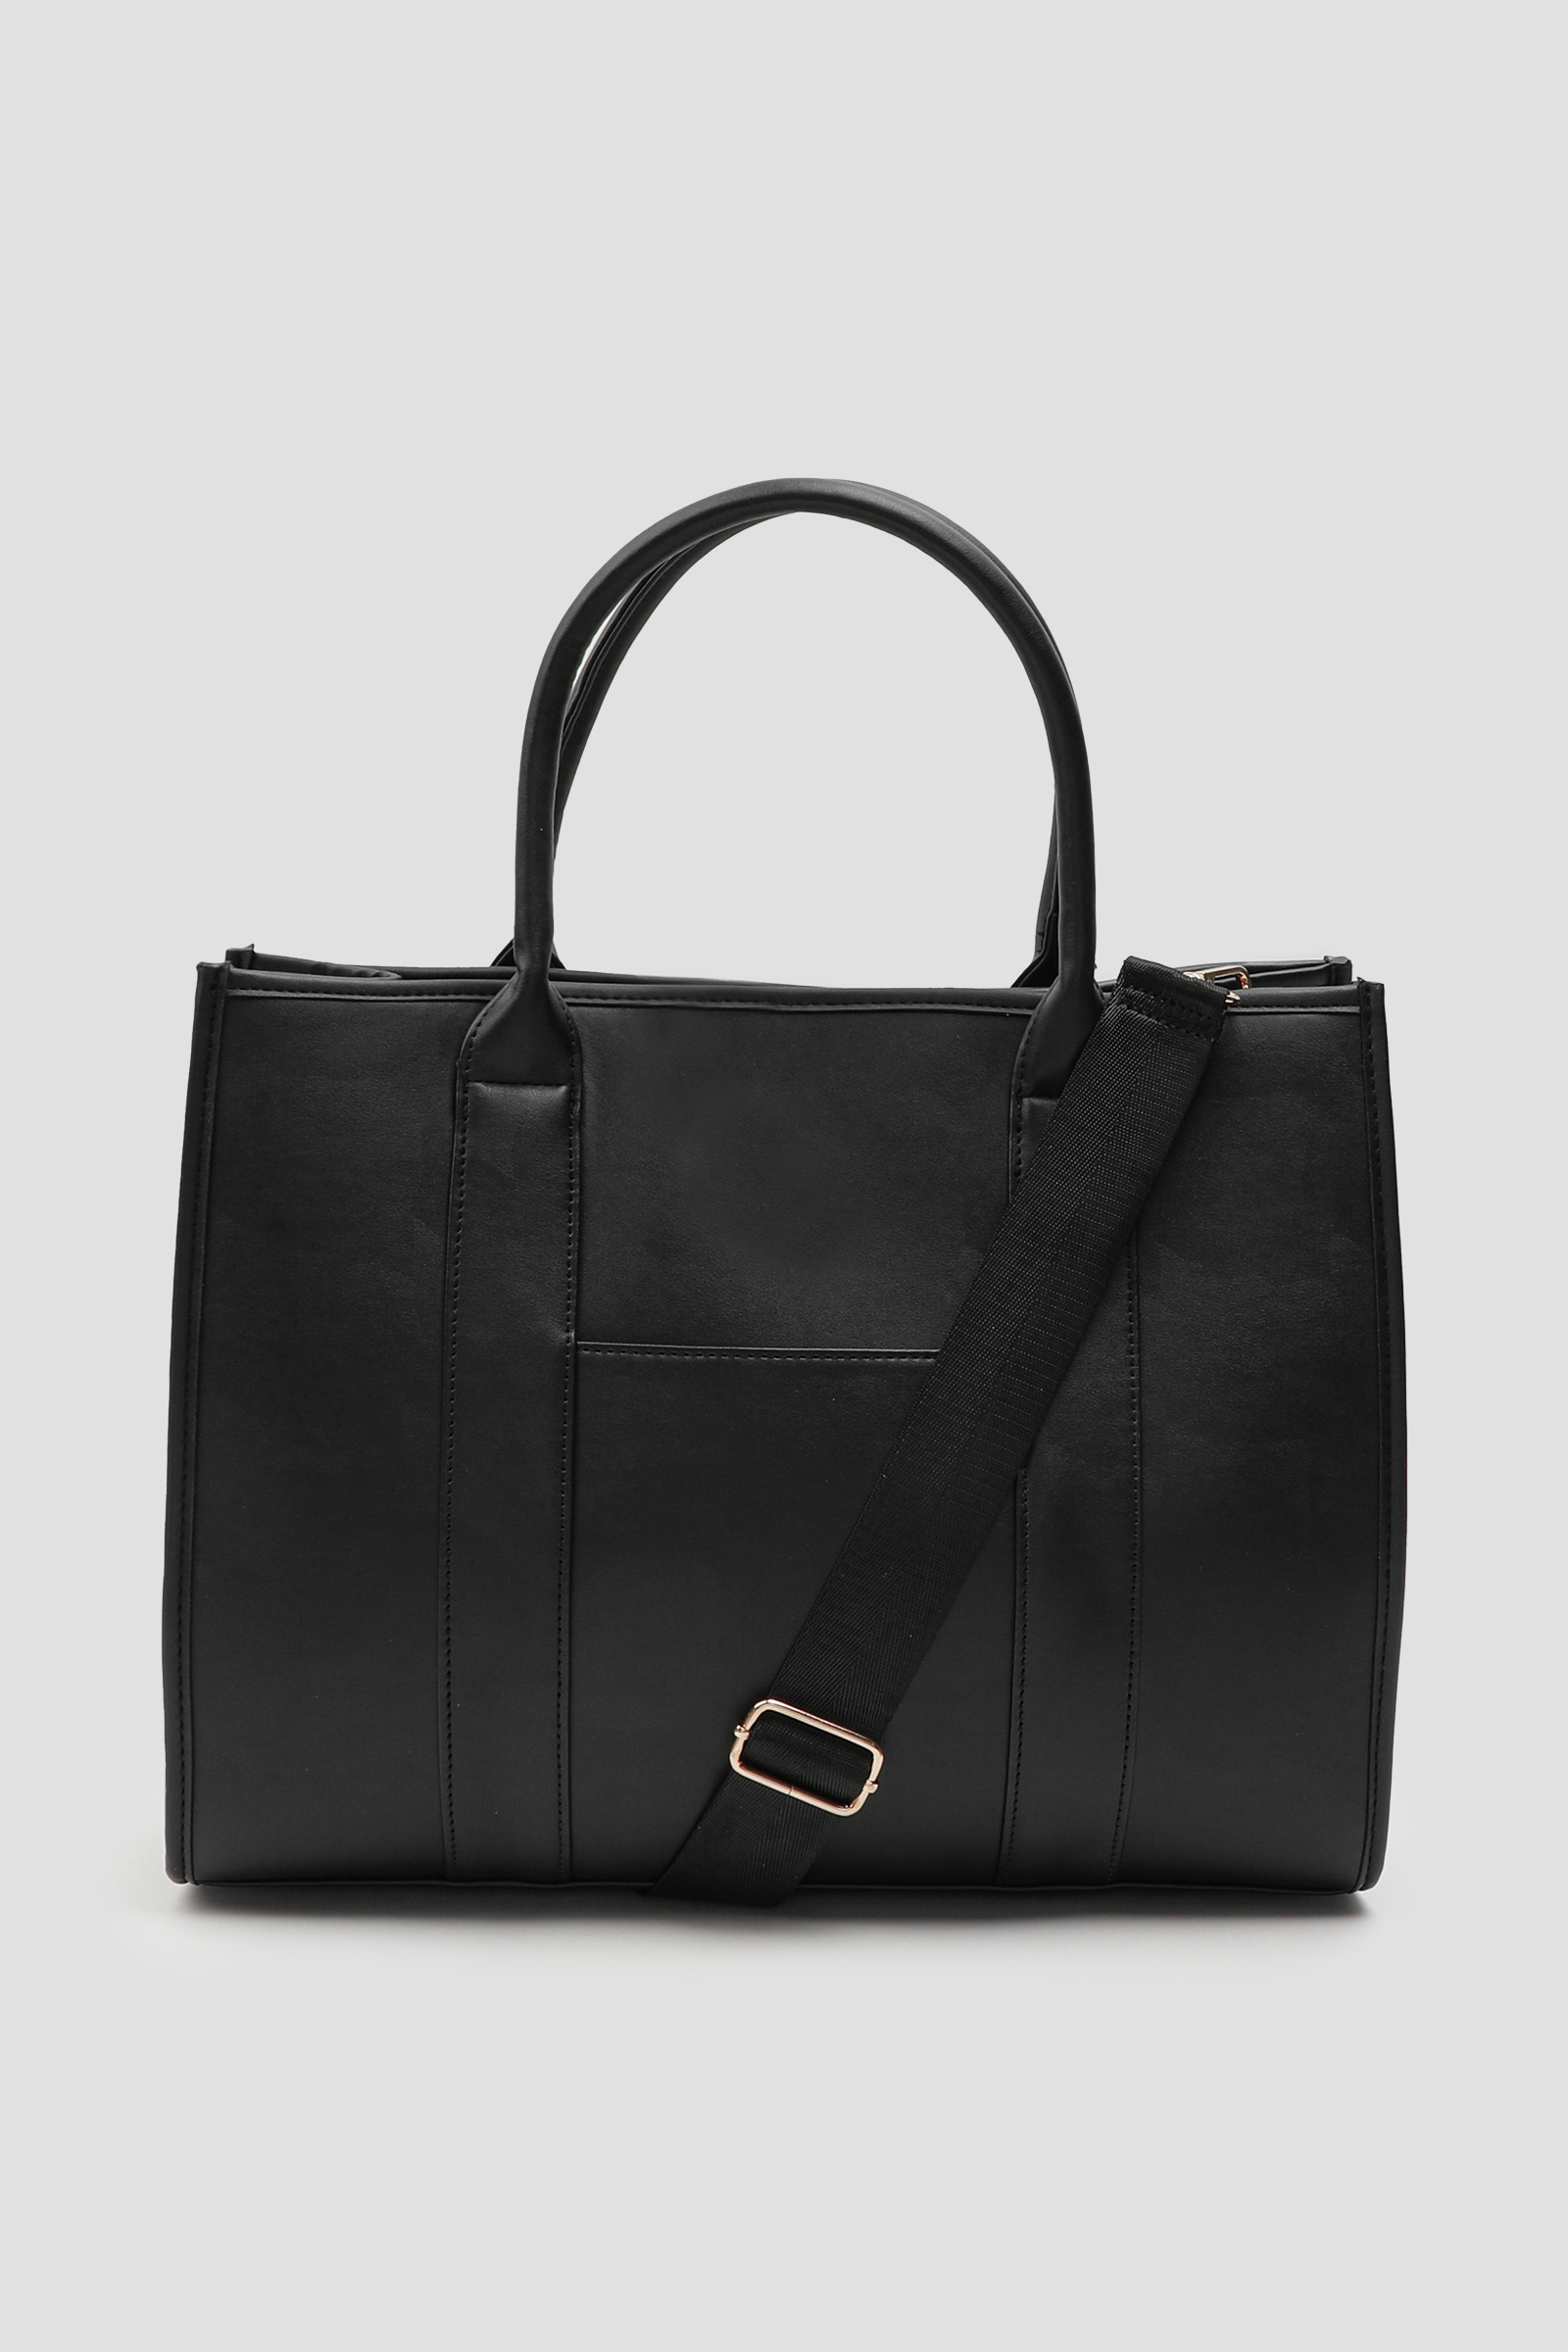 Ardene Large Black Tote Bag | Faux Leather/Polyester